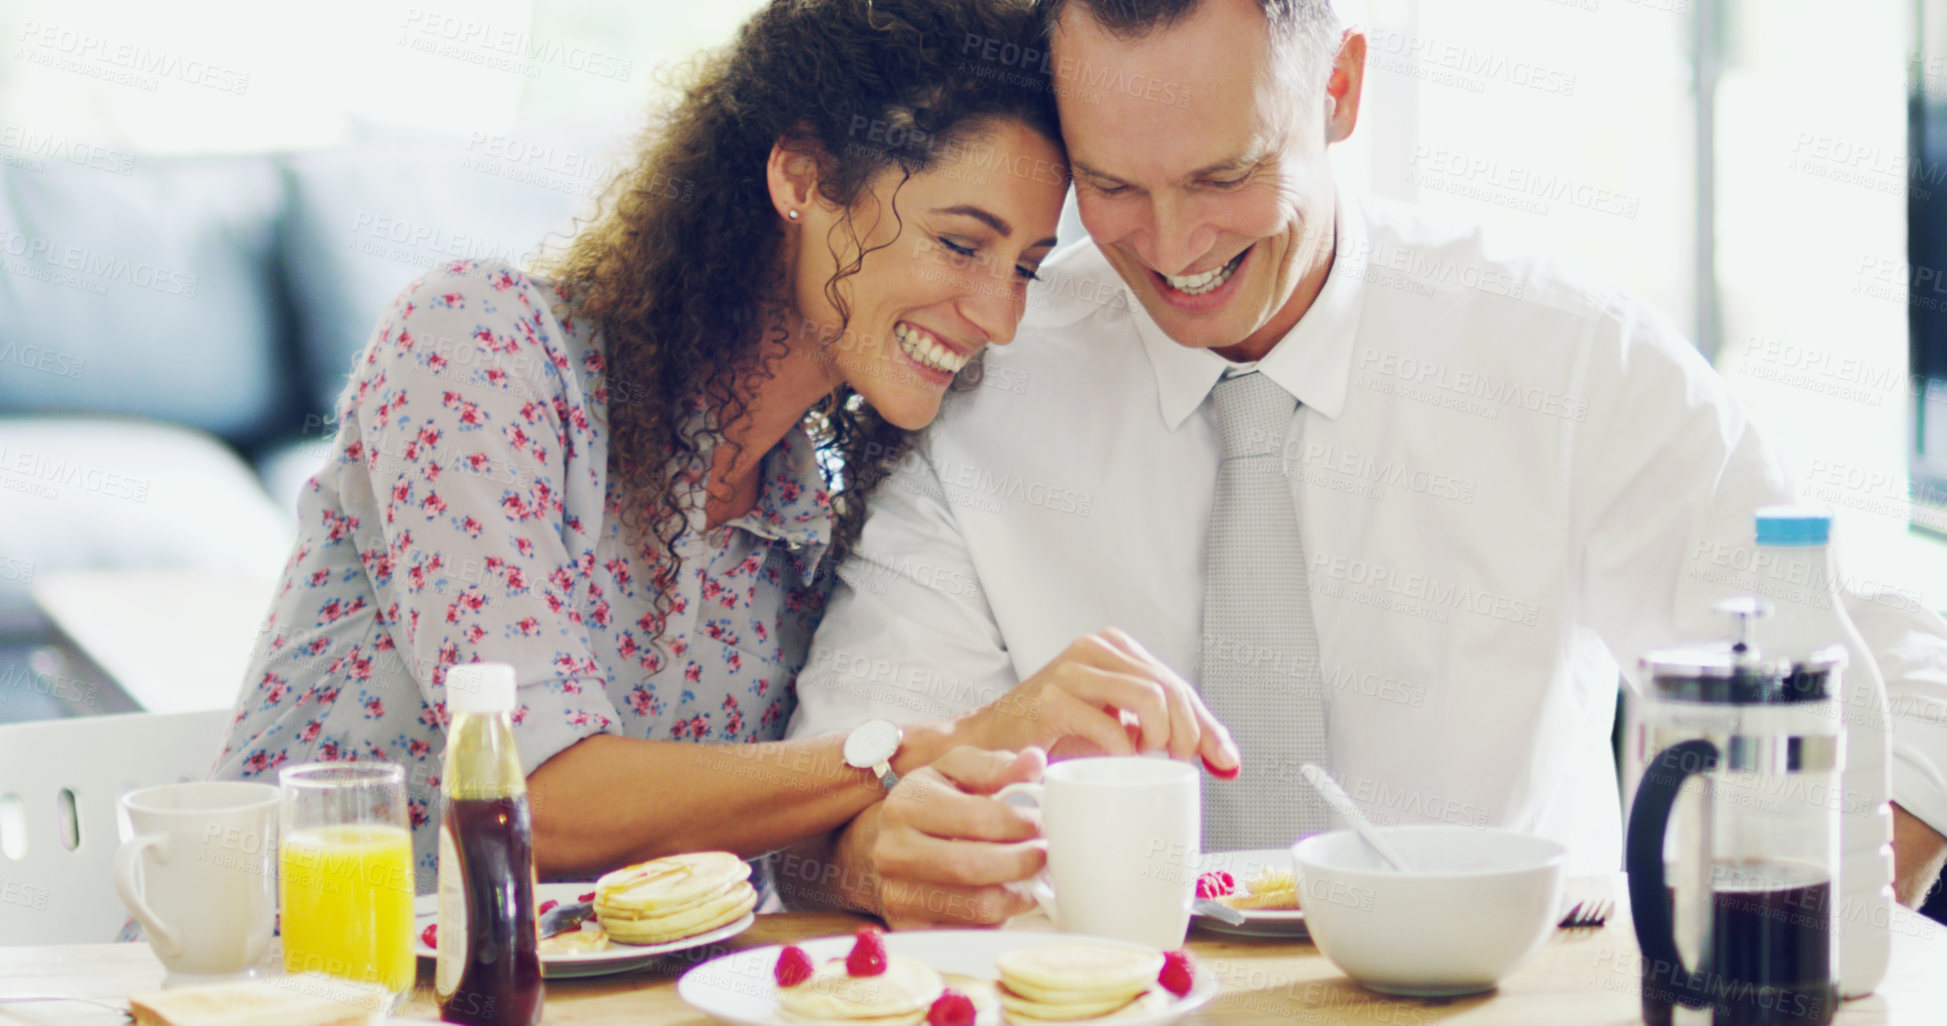 Buy stock photo Shot of an affectionate middle aged couple having breakfast together in the morning at home